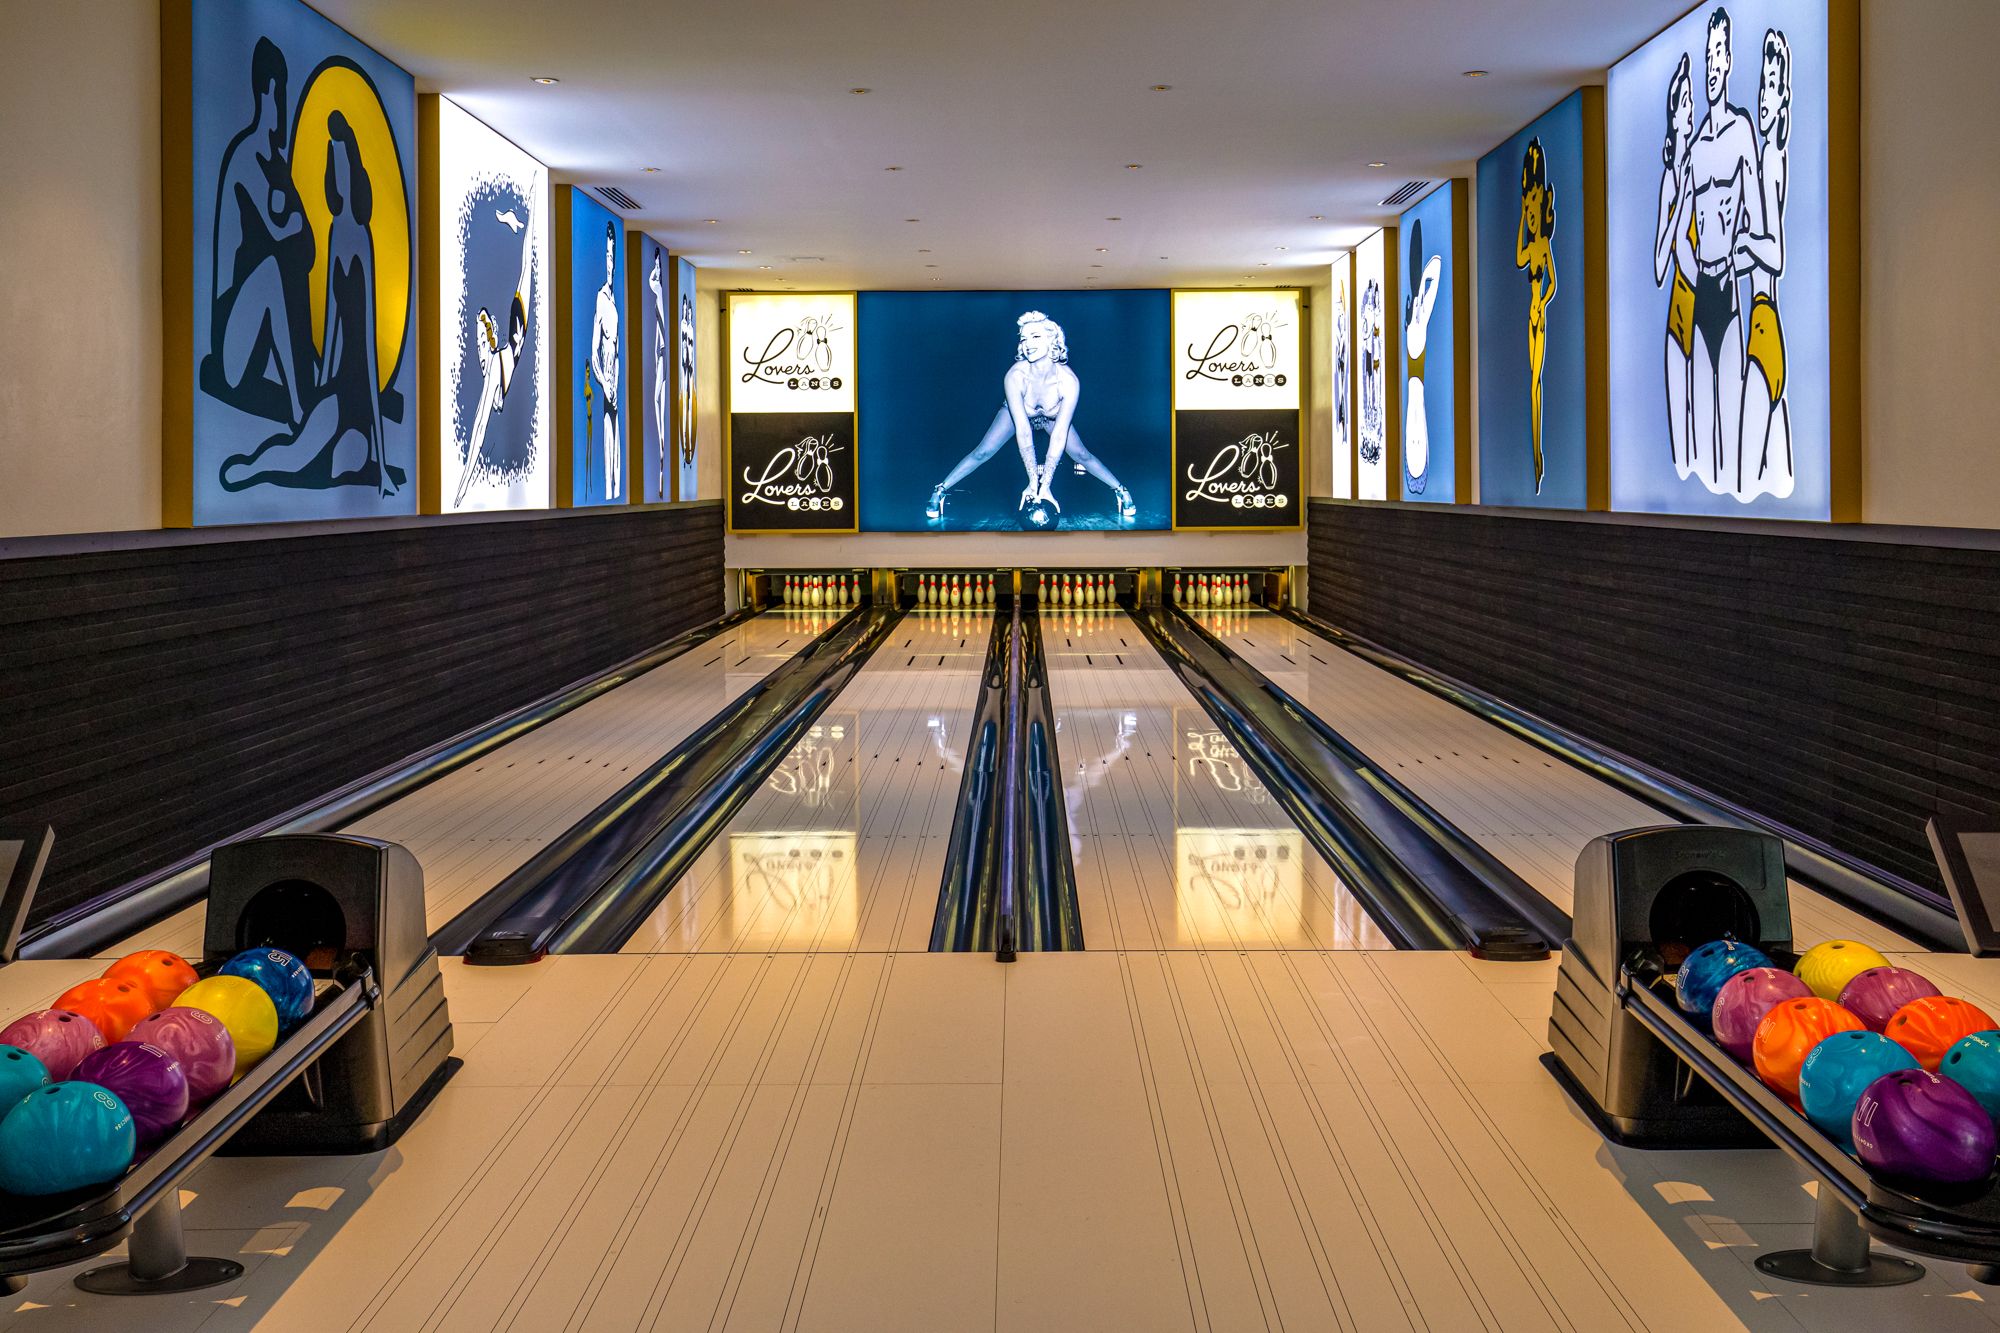 Sandals Royal Barbados Lovers Lane Bowling Alley